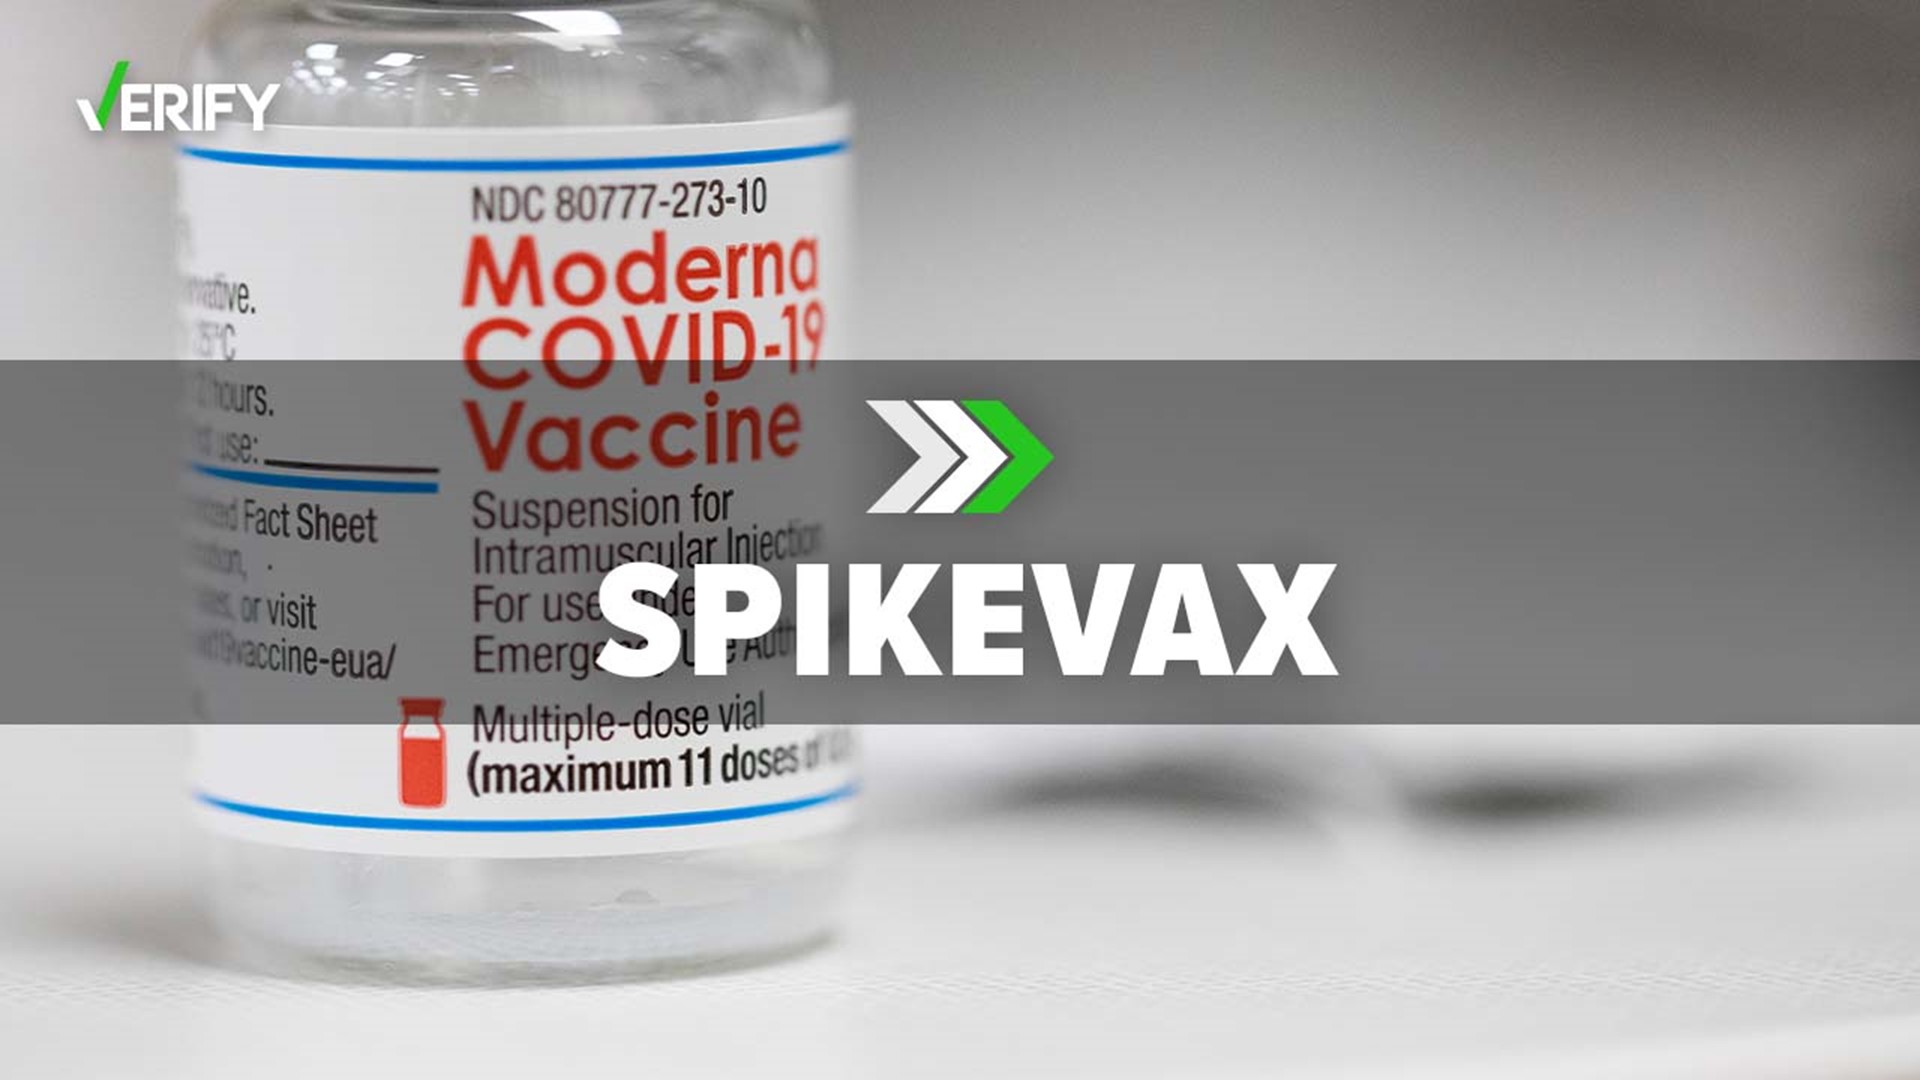 Moderna’s COVID-19 vaccine became the second coronavirus vaccine in the U.S. to receive full approval from the FDA for use in individuals 18 years of age and older.